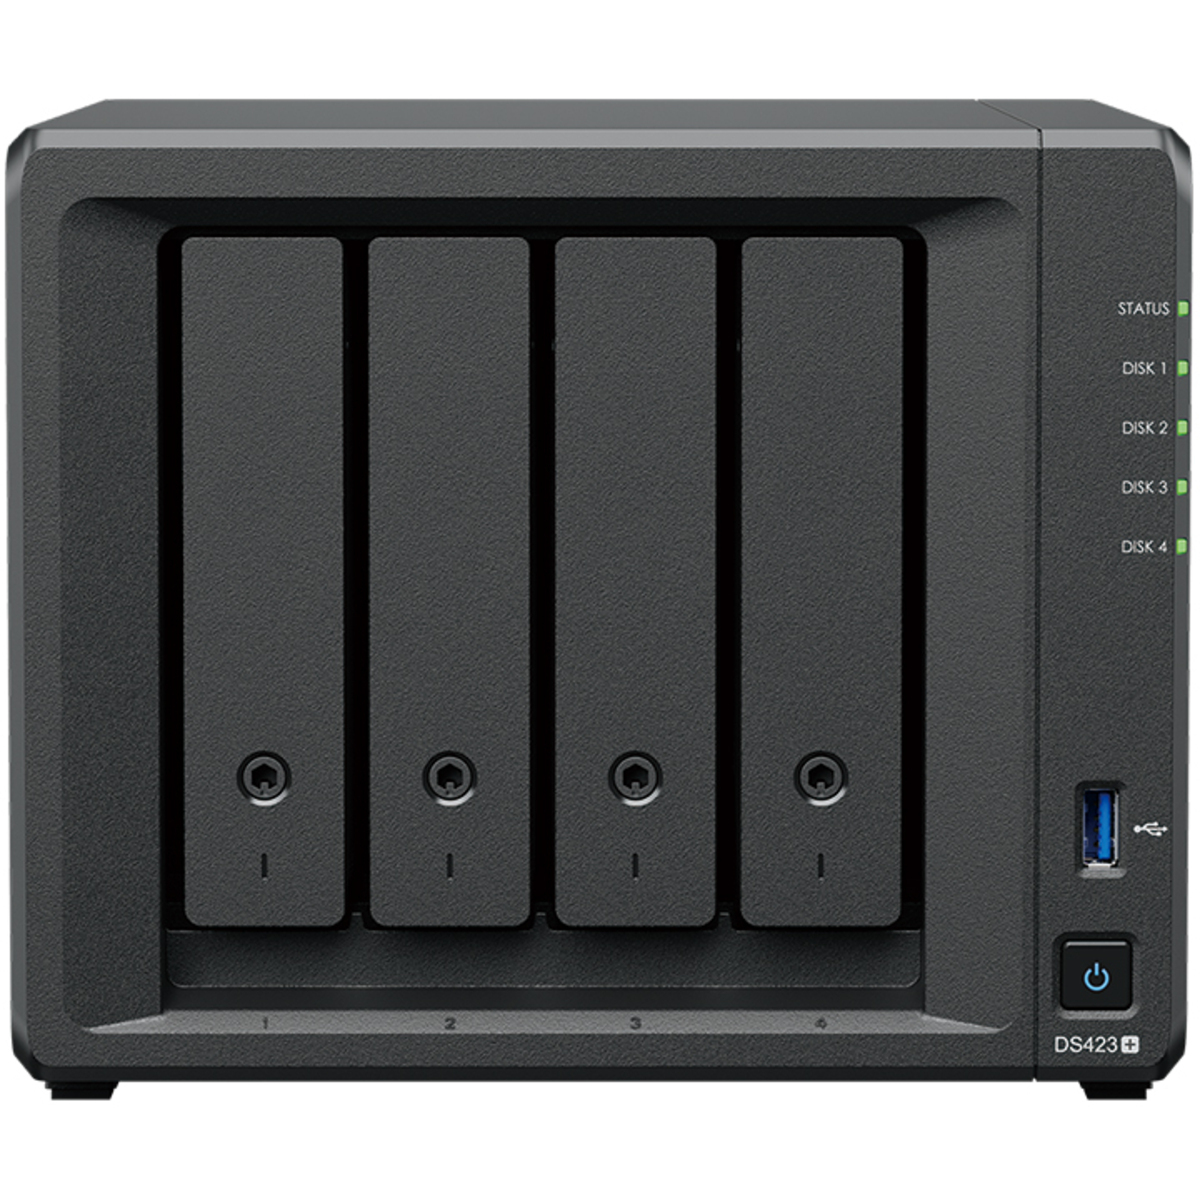 Synology DiskStation DS423+ 8tb 4-Bay Desktop Multimedia / Power User / Business NAS - Network Attached Storage Device 4x2tb Sandisk Ultra 3D SDSSDH3-2T00 2.5 560/520MB/s SATA 6Gb/s SSD CONSUMER Class Drives Installed - Burn-In Tested - FREE RAM UPGRADE DiskStation DS423+